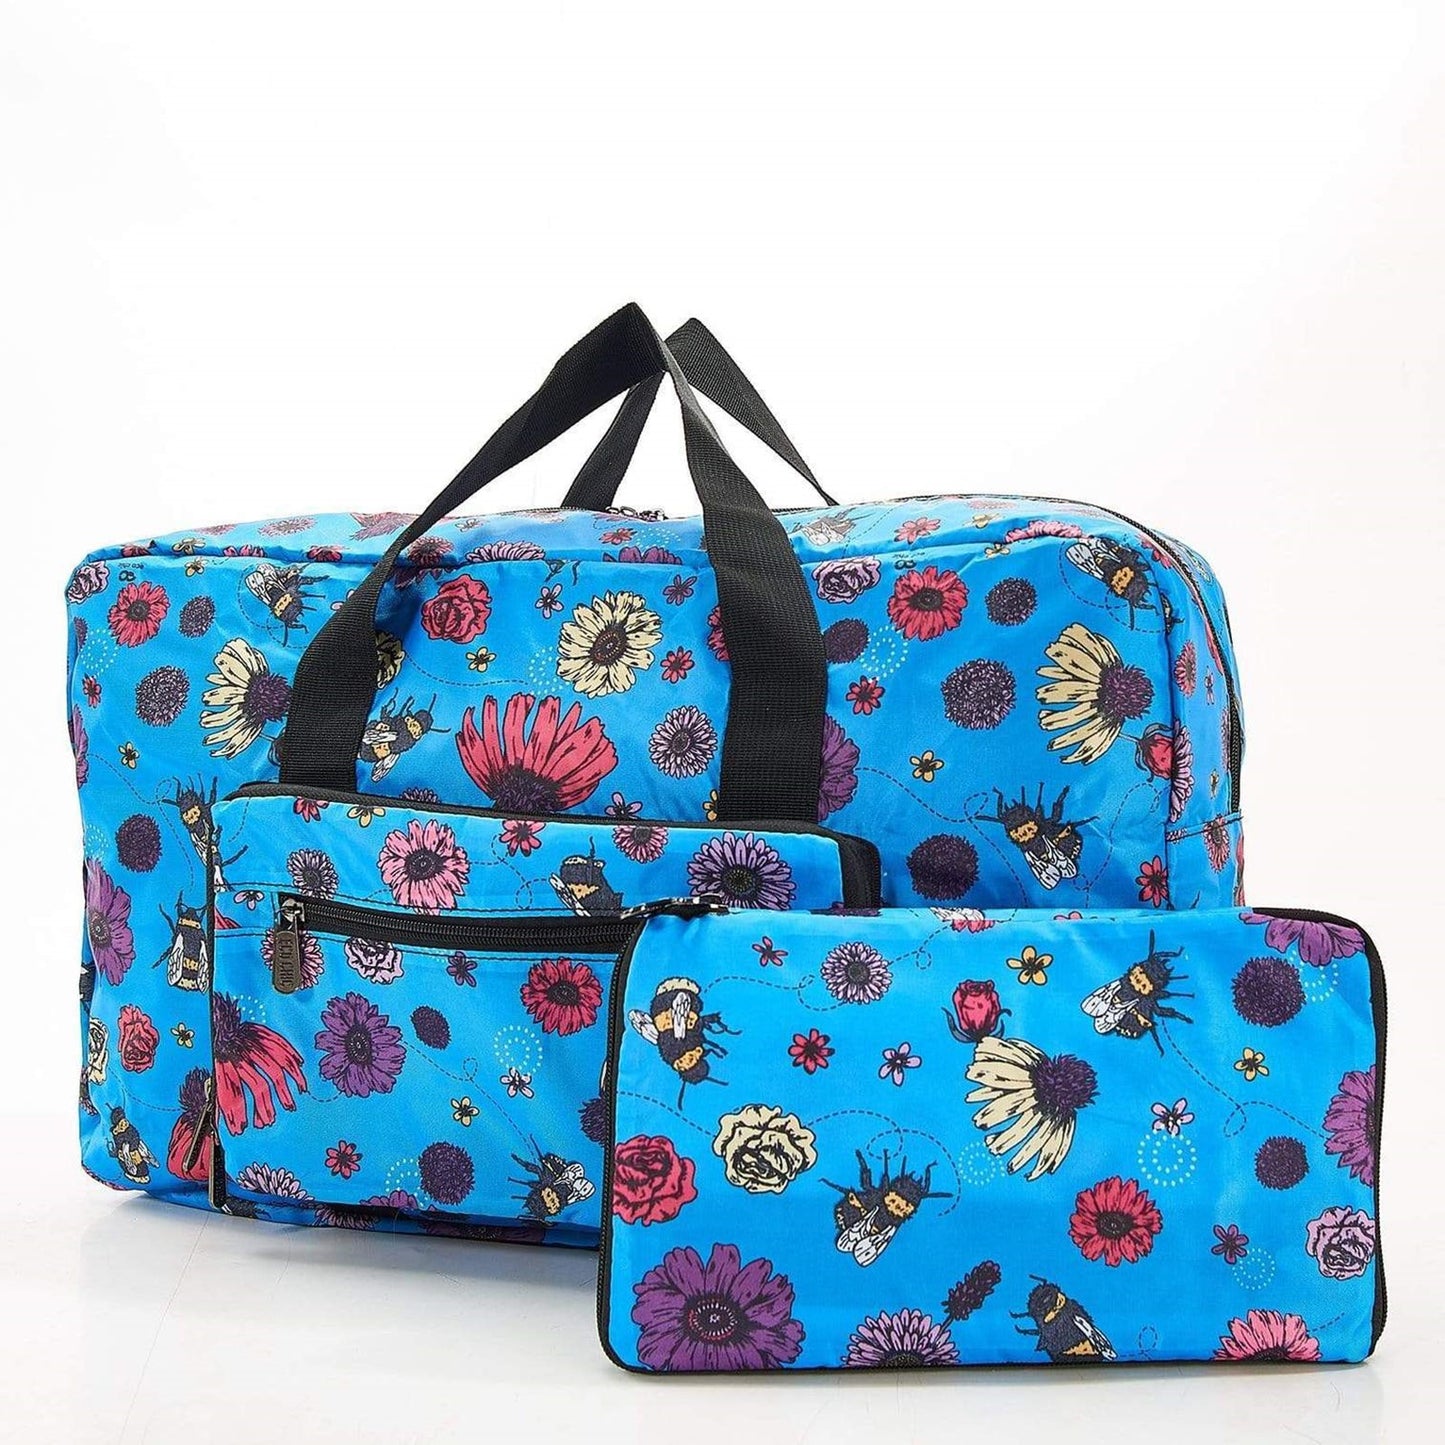 Eco Chic Lightweight Foldable Holdall Bee 2 (Blue)